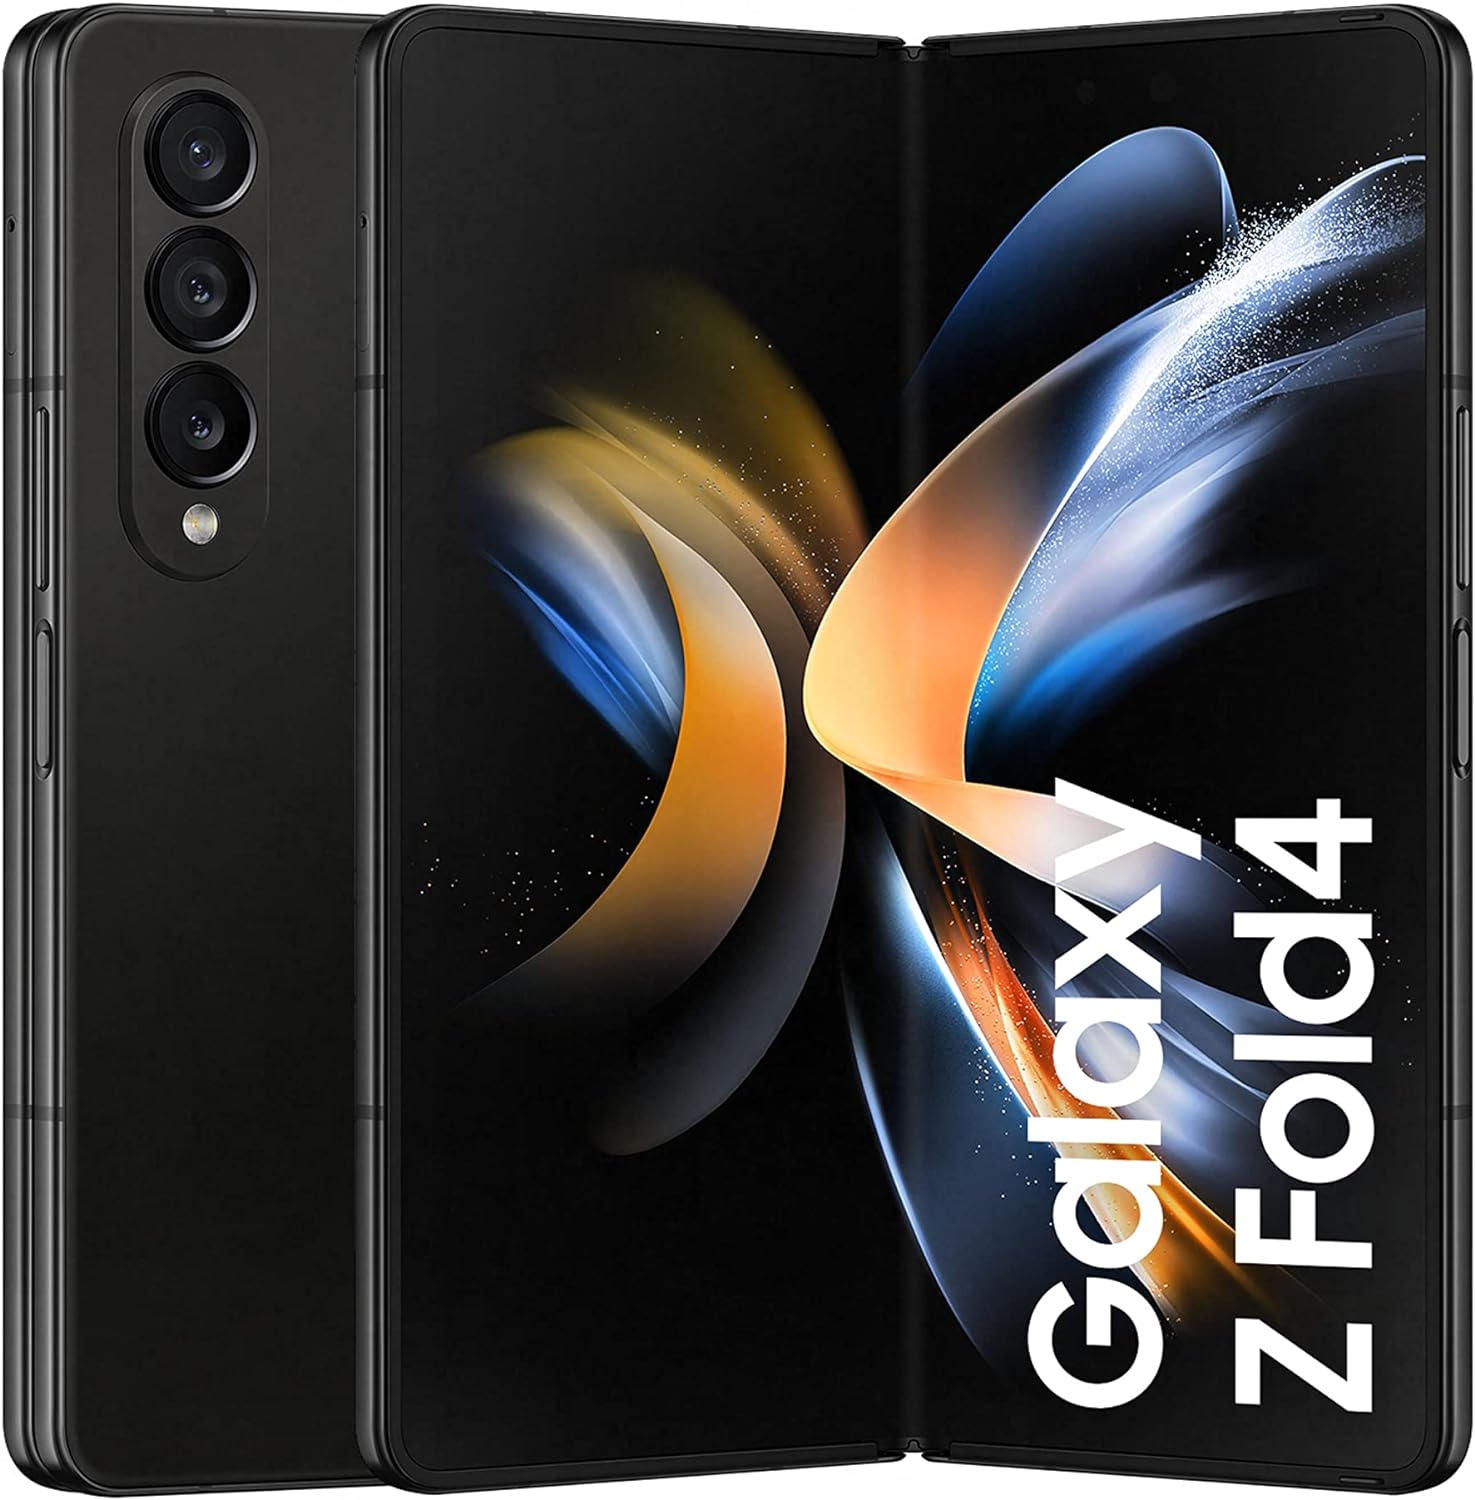 SAMSUNG Galaxy Z Fold 4 Android Folding Smartphone in Phantom Black - Immersive 7.6-inch Infinity Flex Display with Under Display Camera 8806094494938